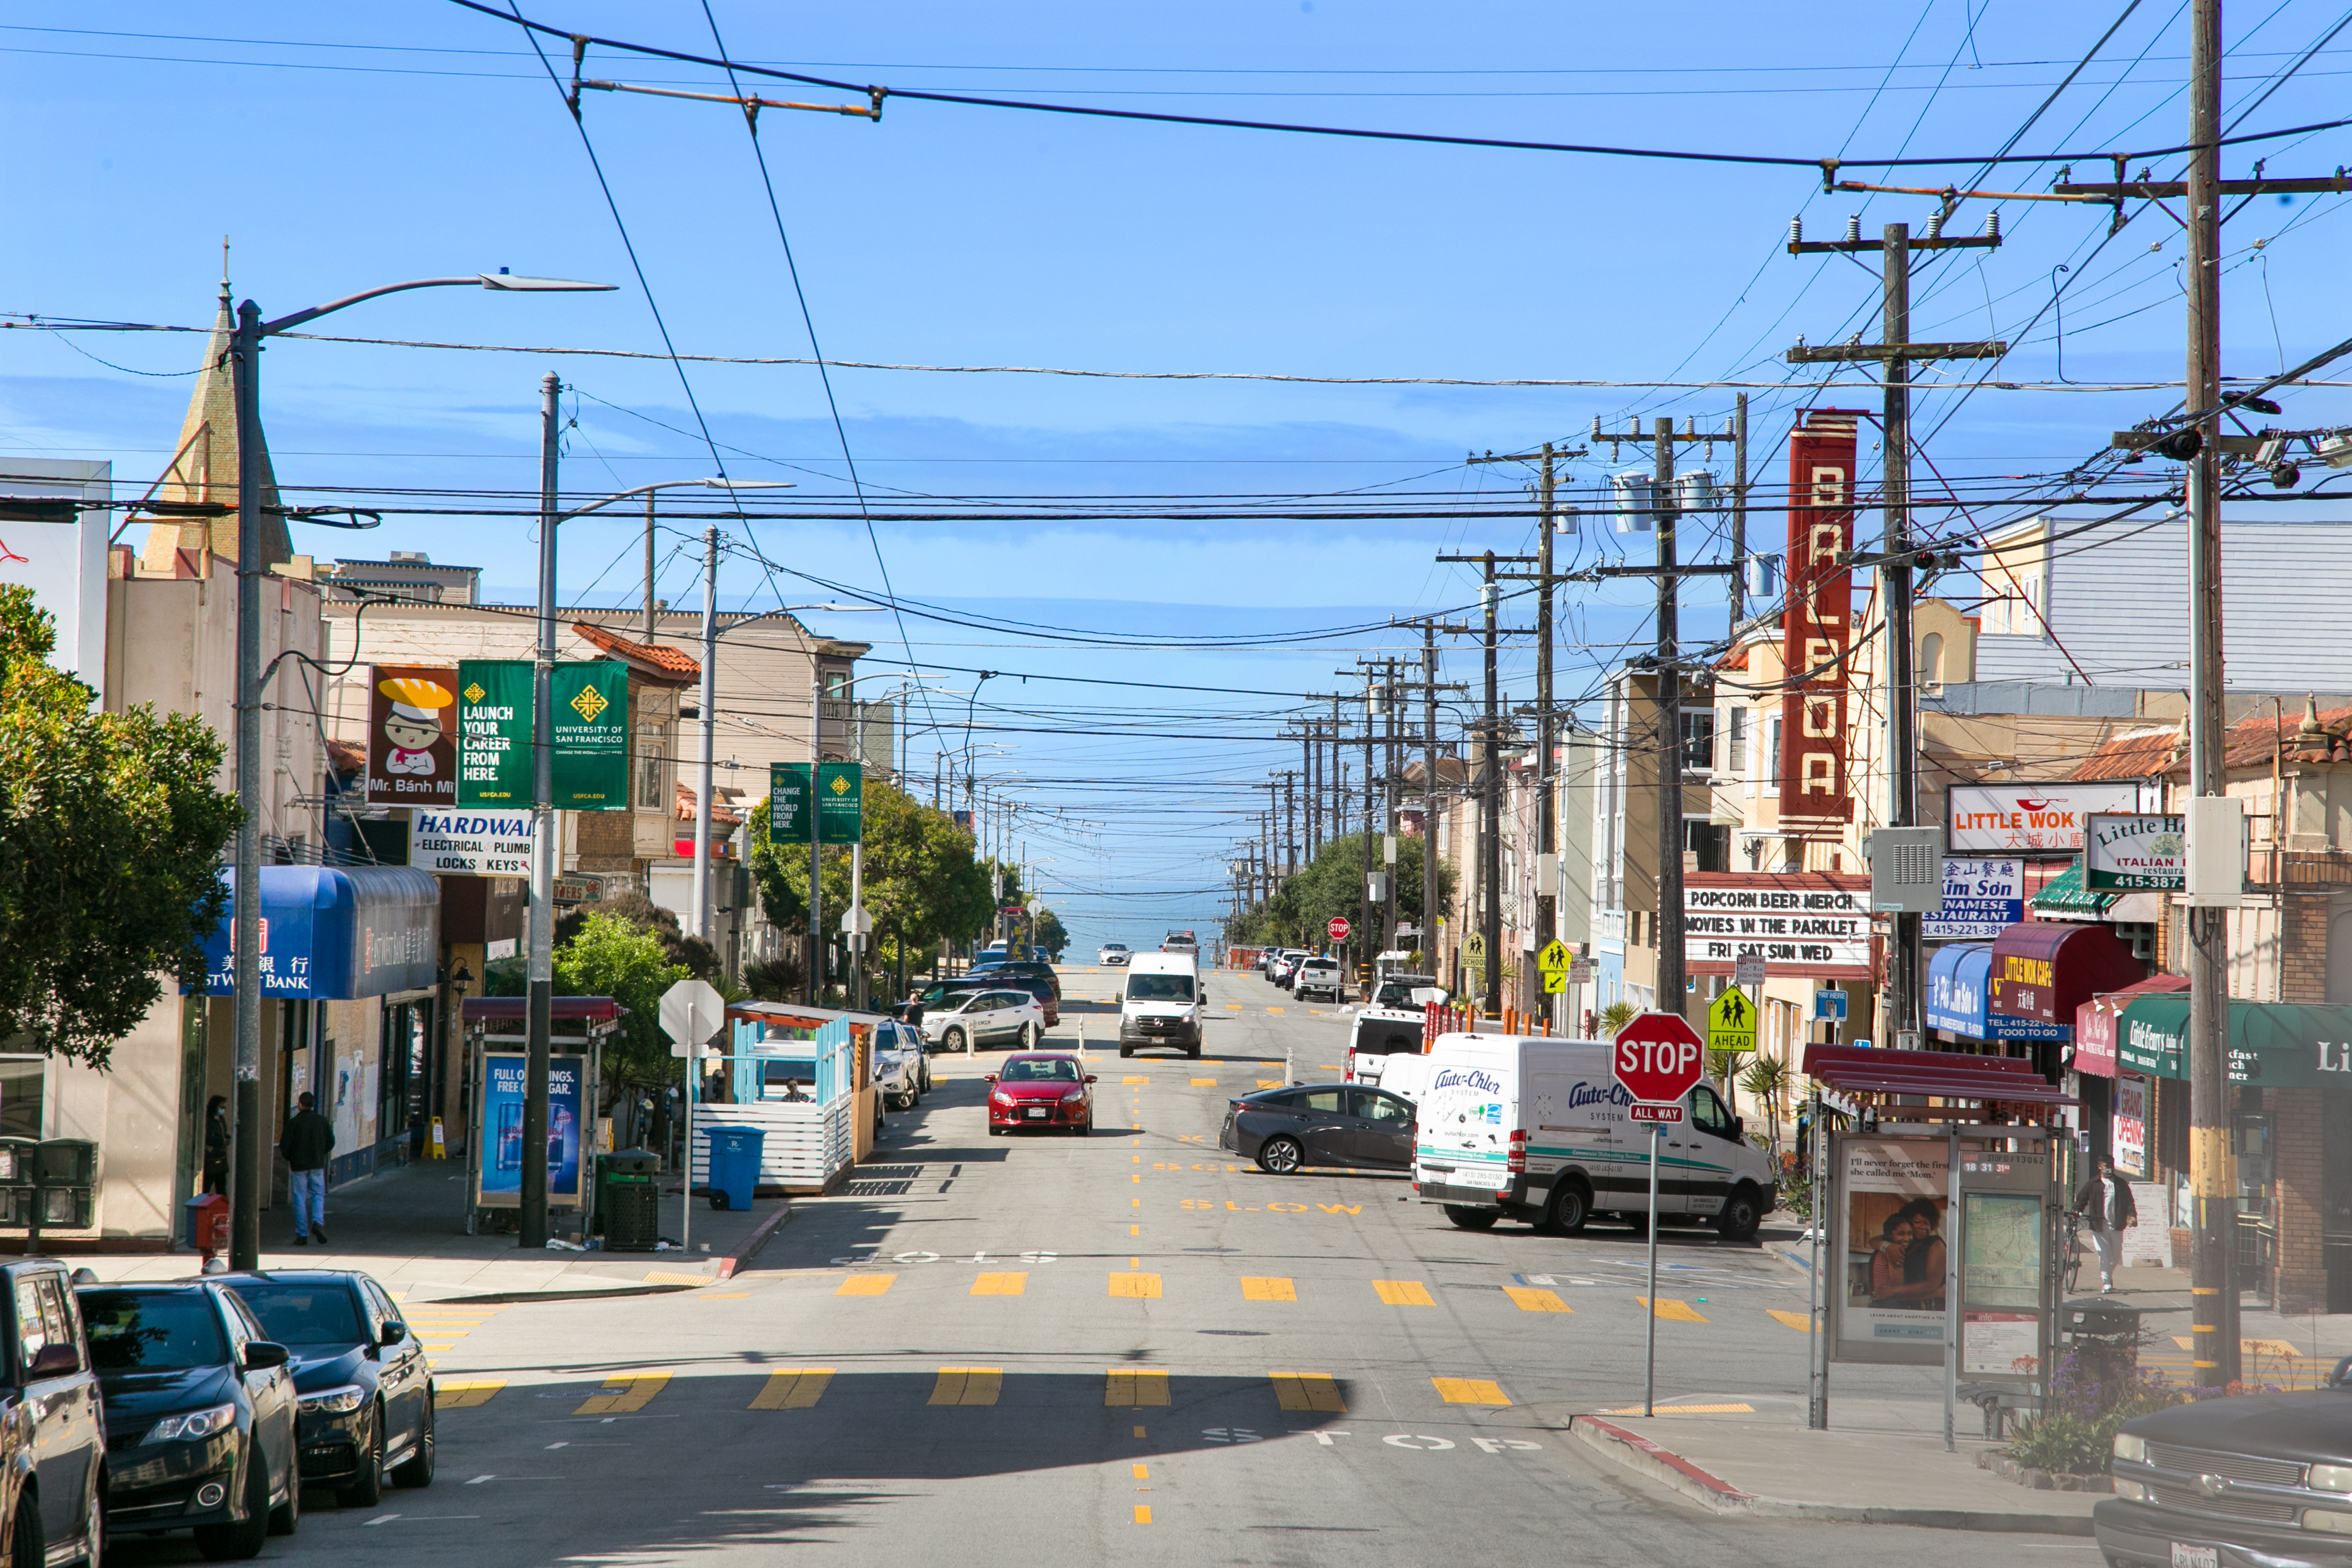 San Francisco’s Richmond District one of the “Coolest Neighborhoods in the World”